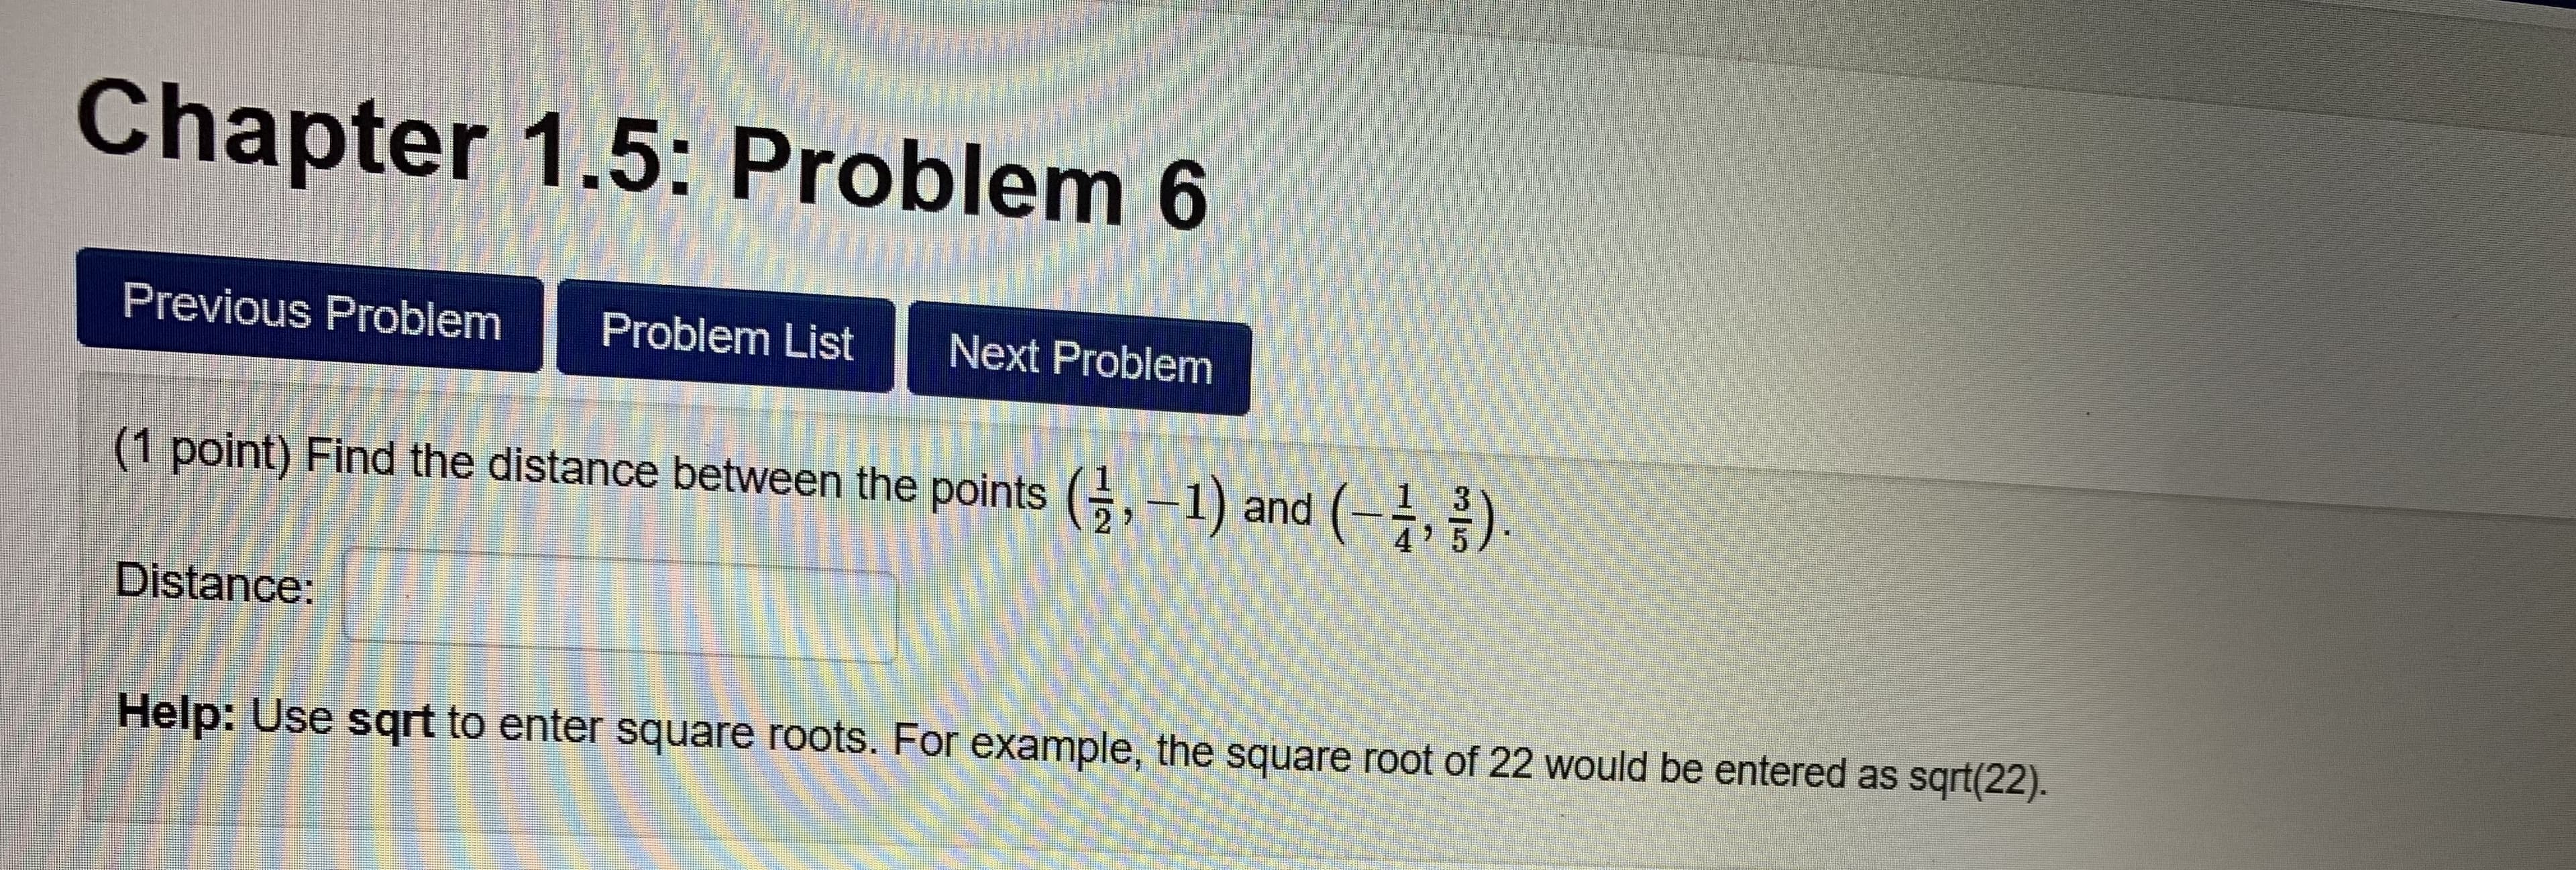 Chapter 1.5: Problem 6
Previous Problem Problem List Next Problem
(1 point) Find the distance between the points (,1) and)
2 7
4 ' 5
Distance
Help: Use sqrt to enter square roots. For example, the square root of 22 would be entered as sqrt(22).
